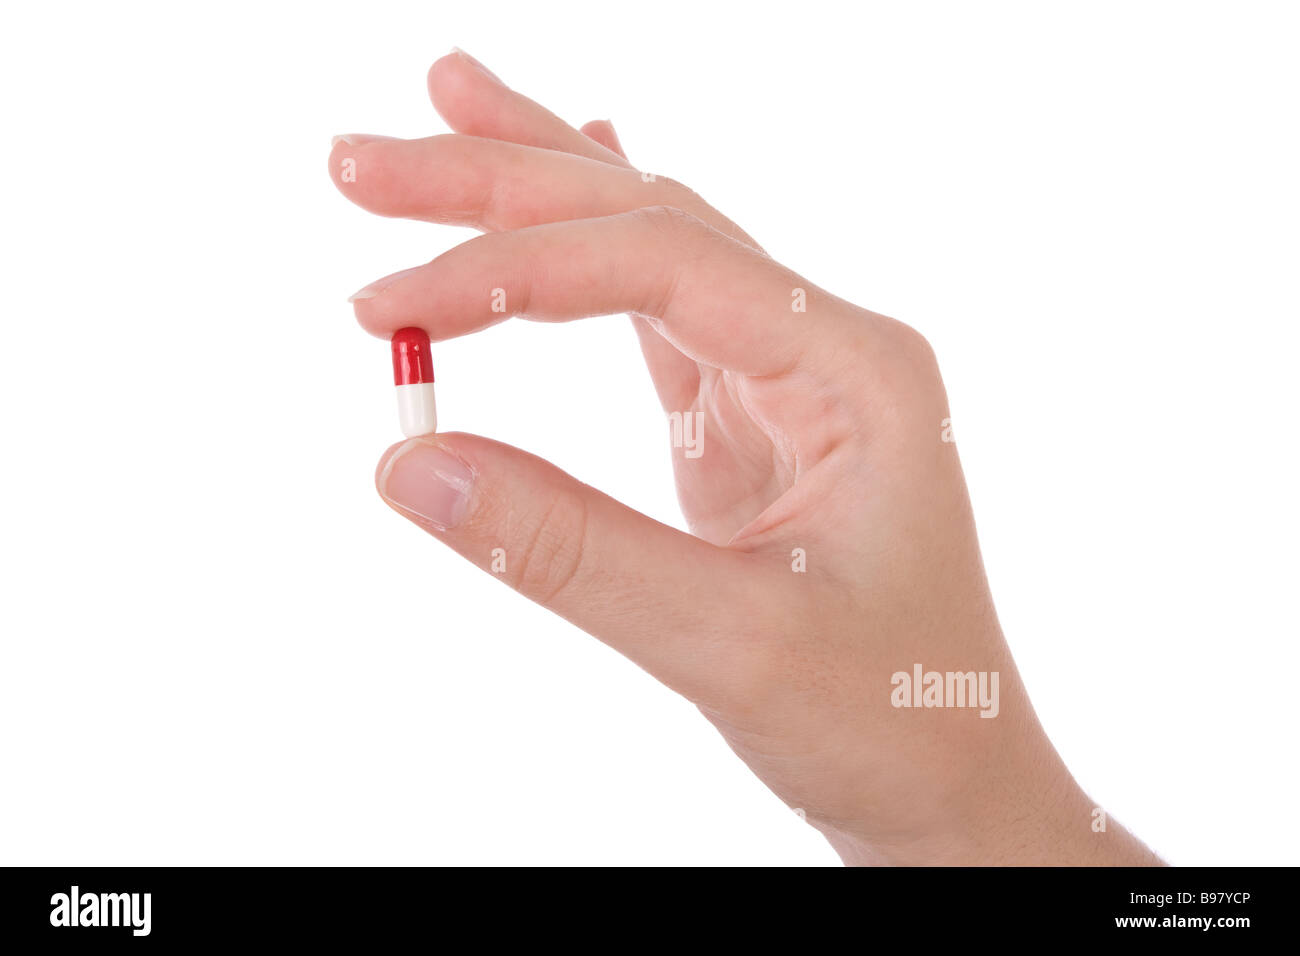 Hand holding a capsule or pill isolated on white Stock Photo